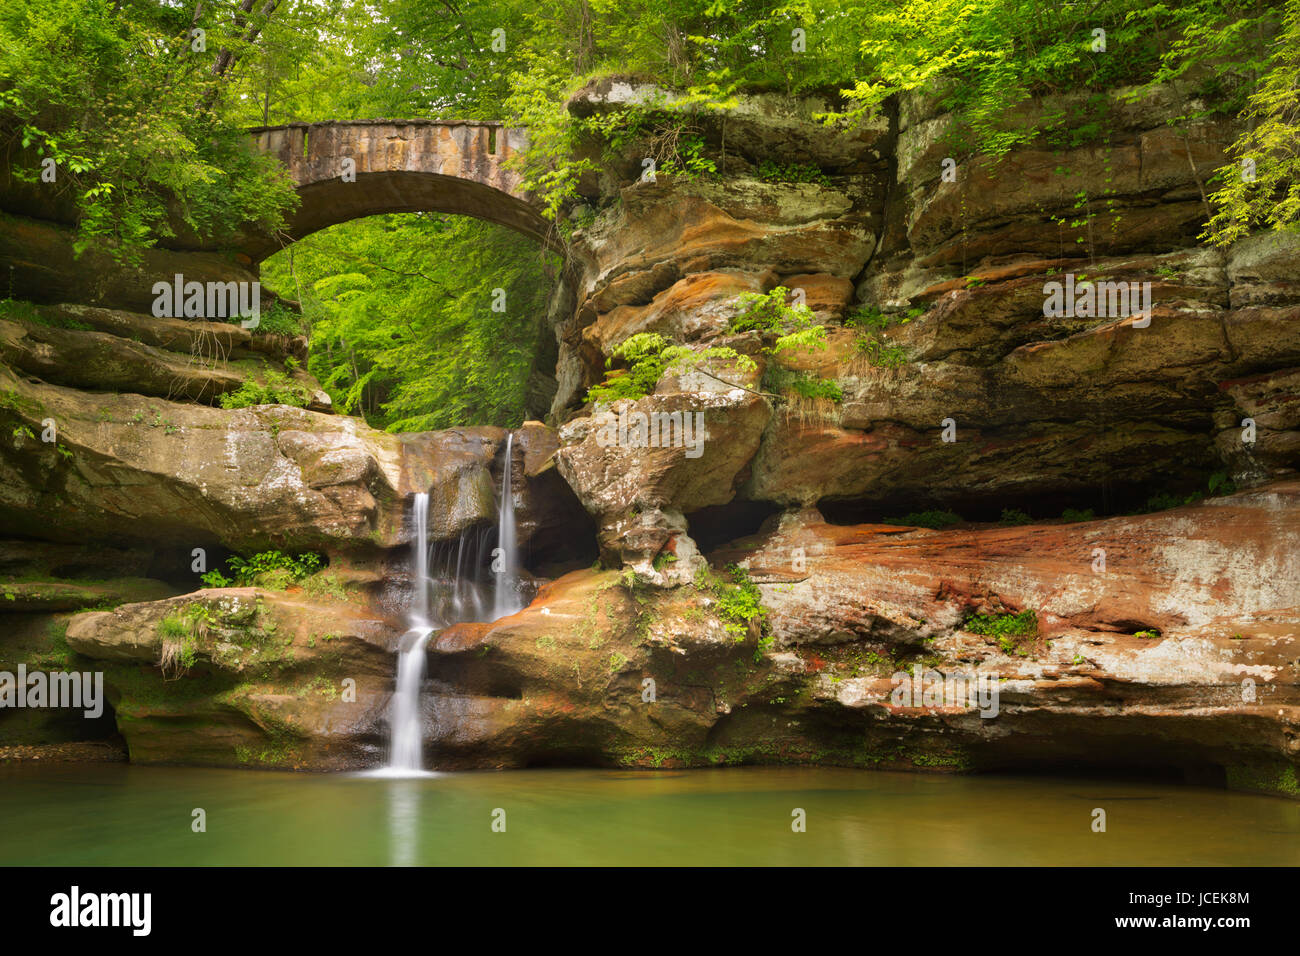 The Upper Falls waterfall and bridge in Hocking Hills State Park, Ohio, USA. Stock Photo